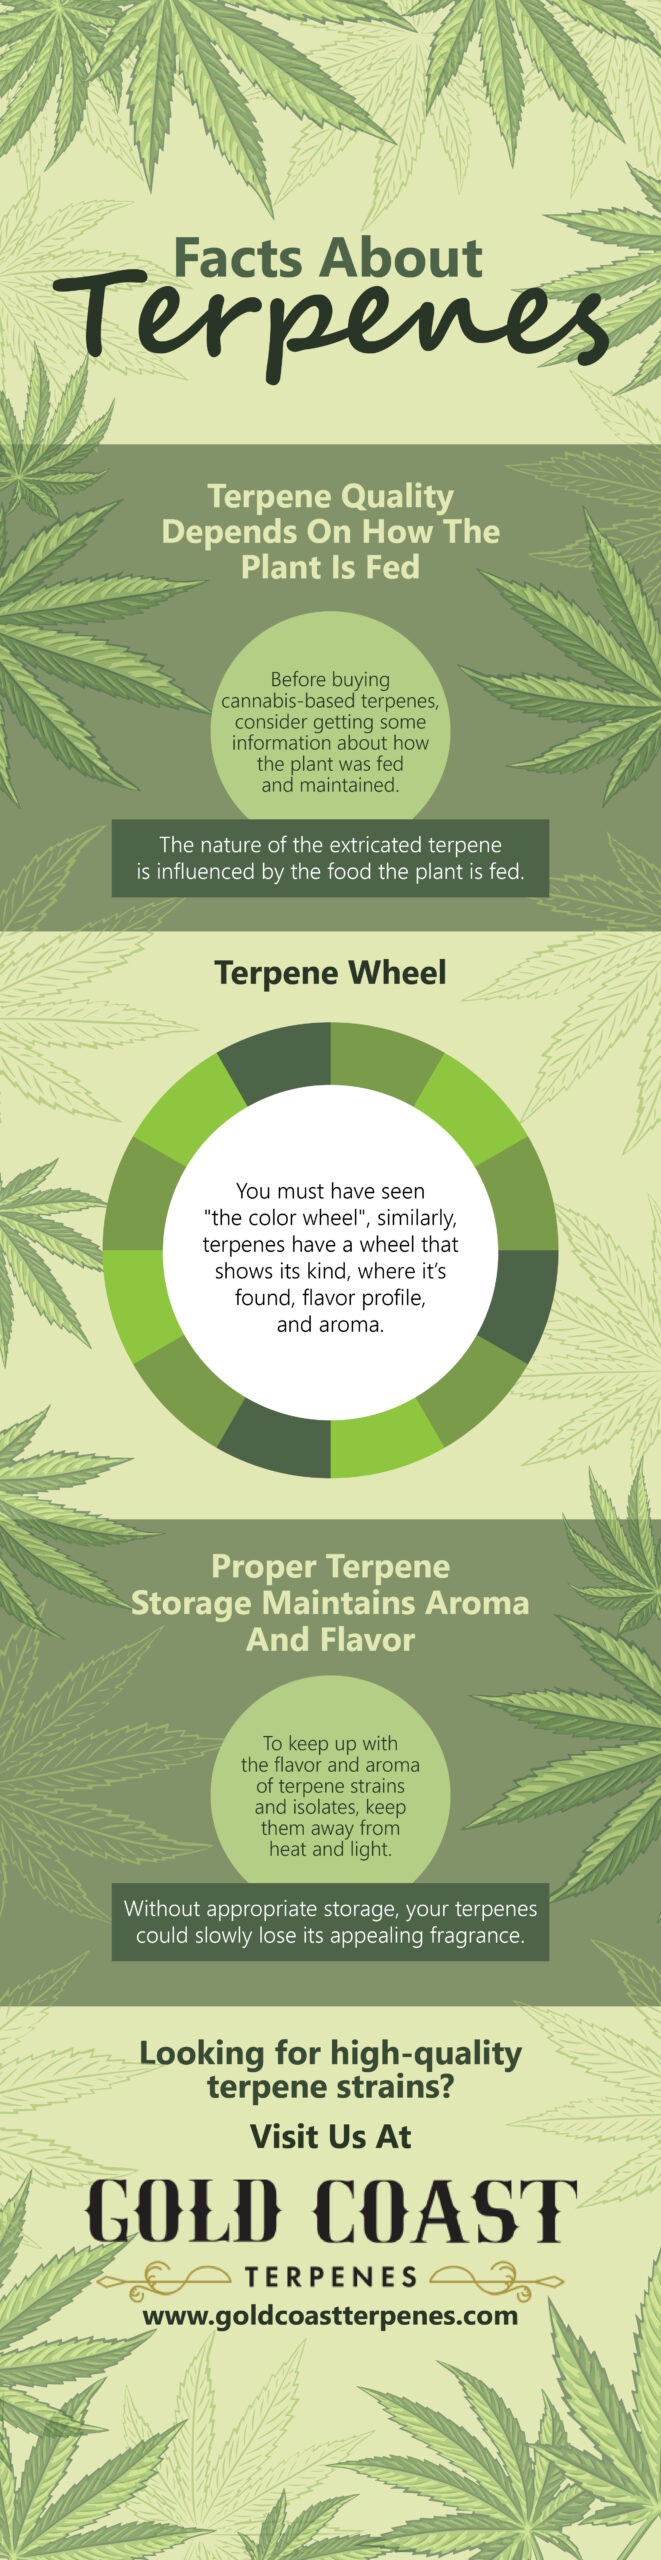 Facts about terpenes - Infograph